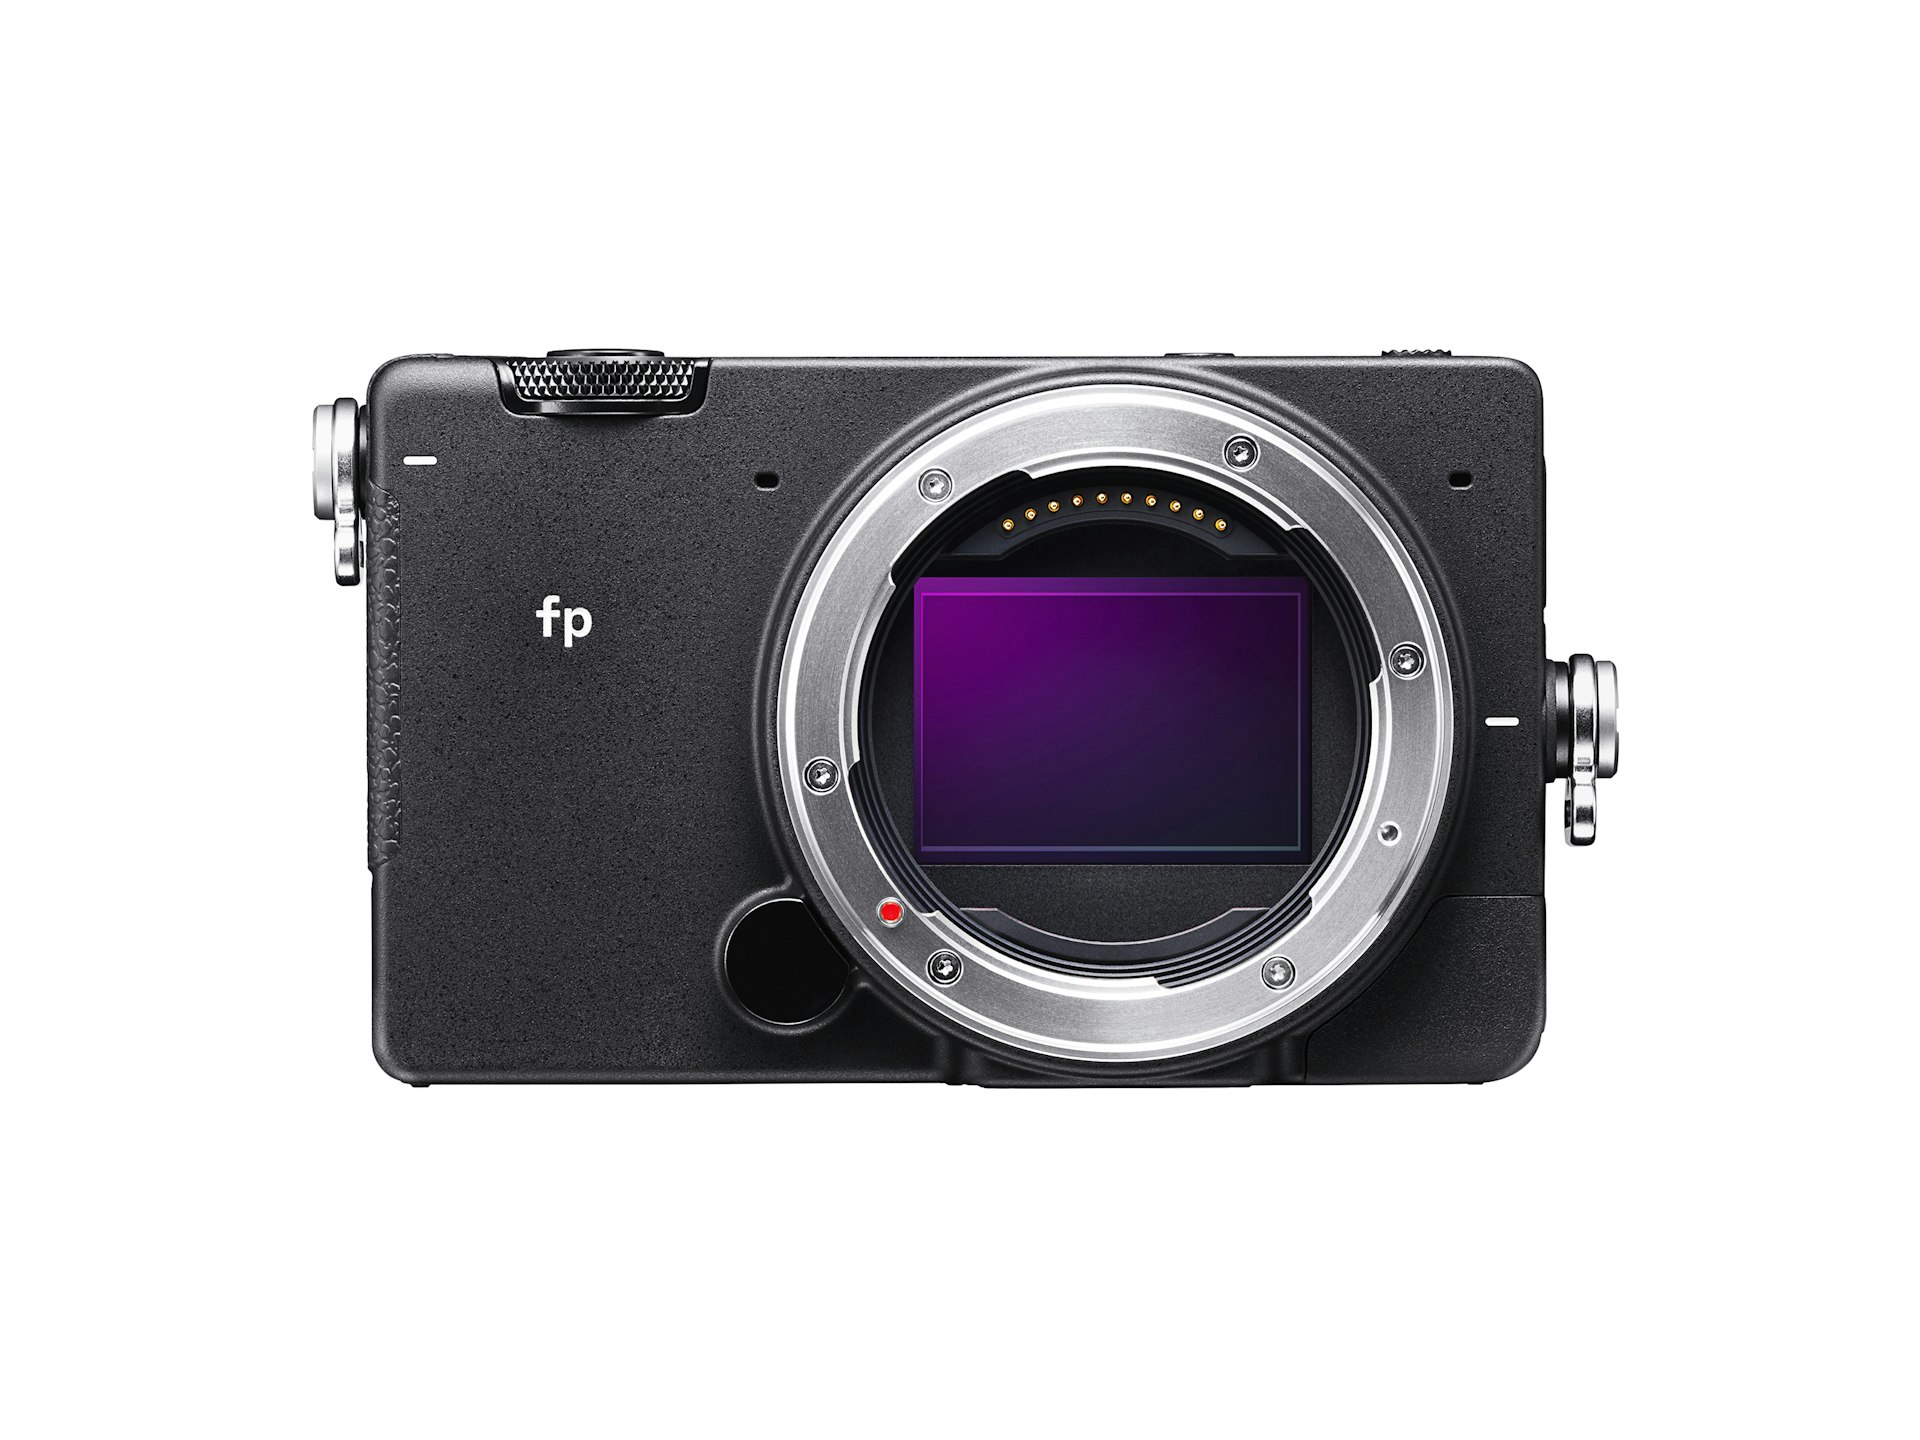 Product shot of the Sigma fp and exposed sensor